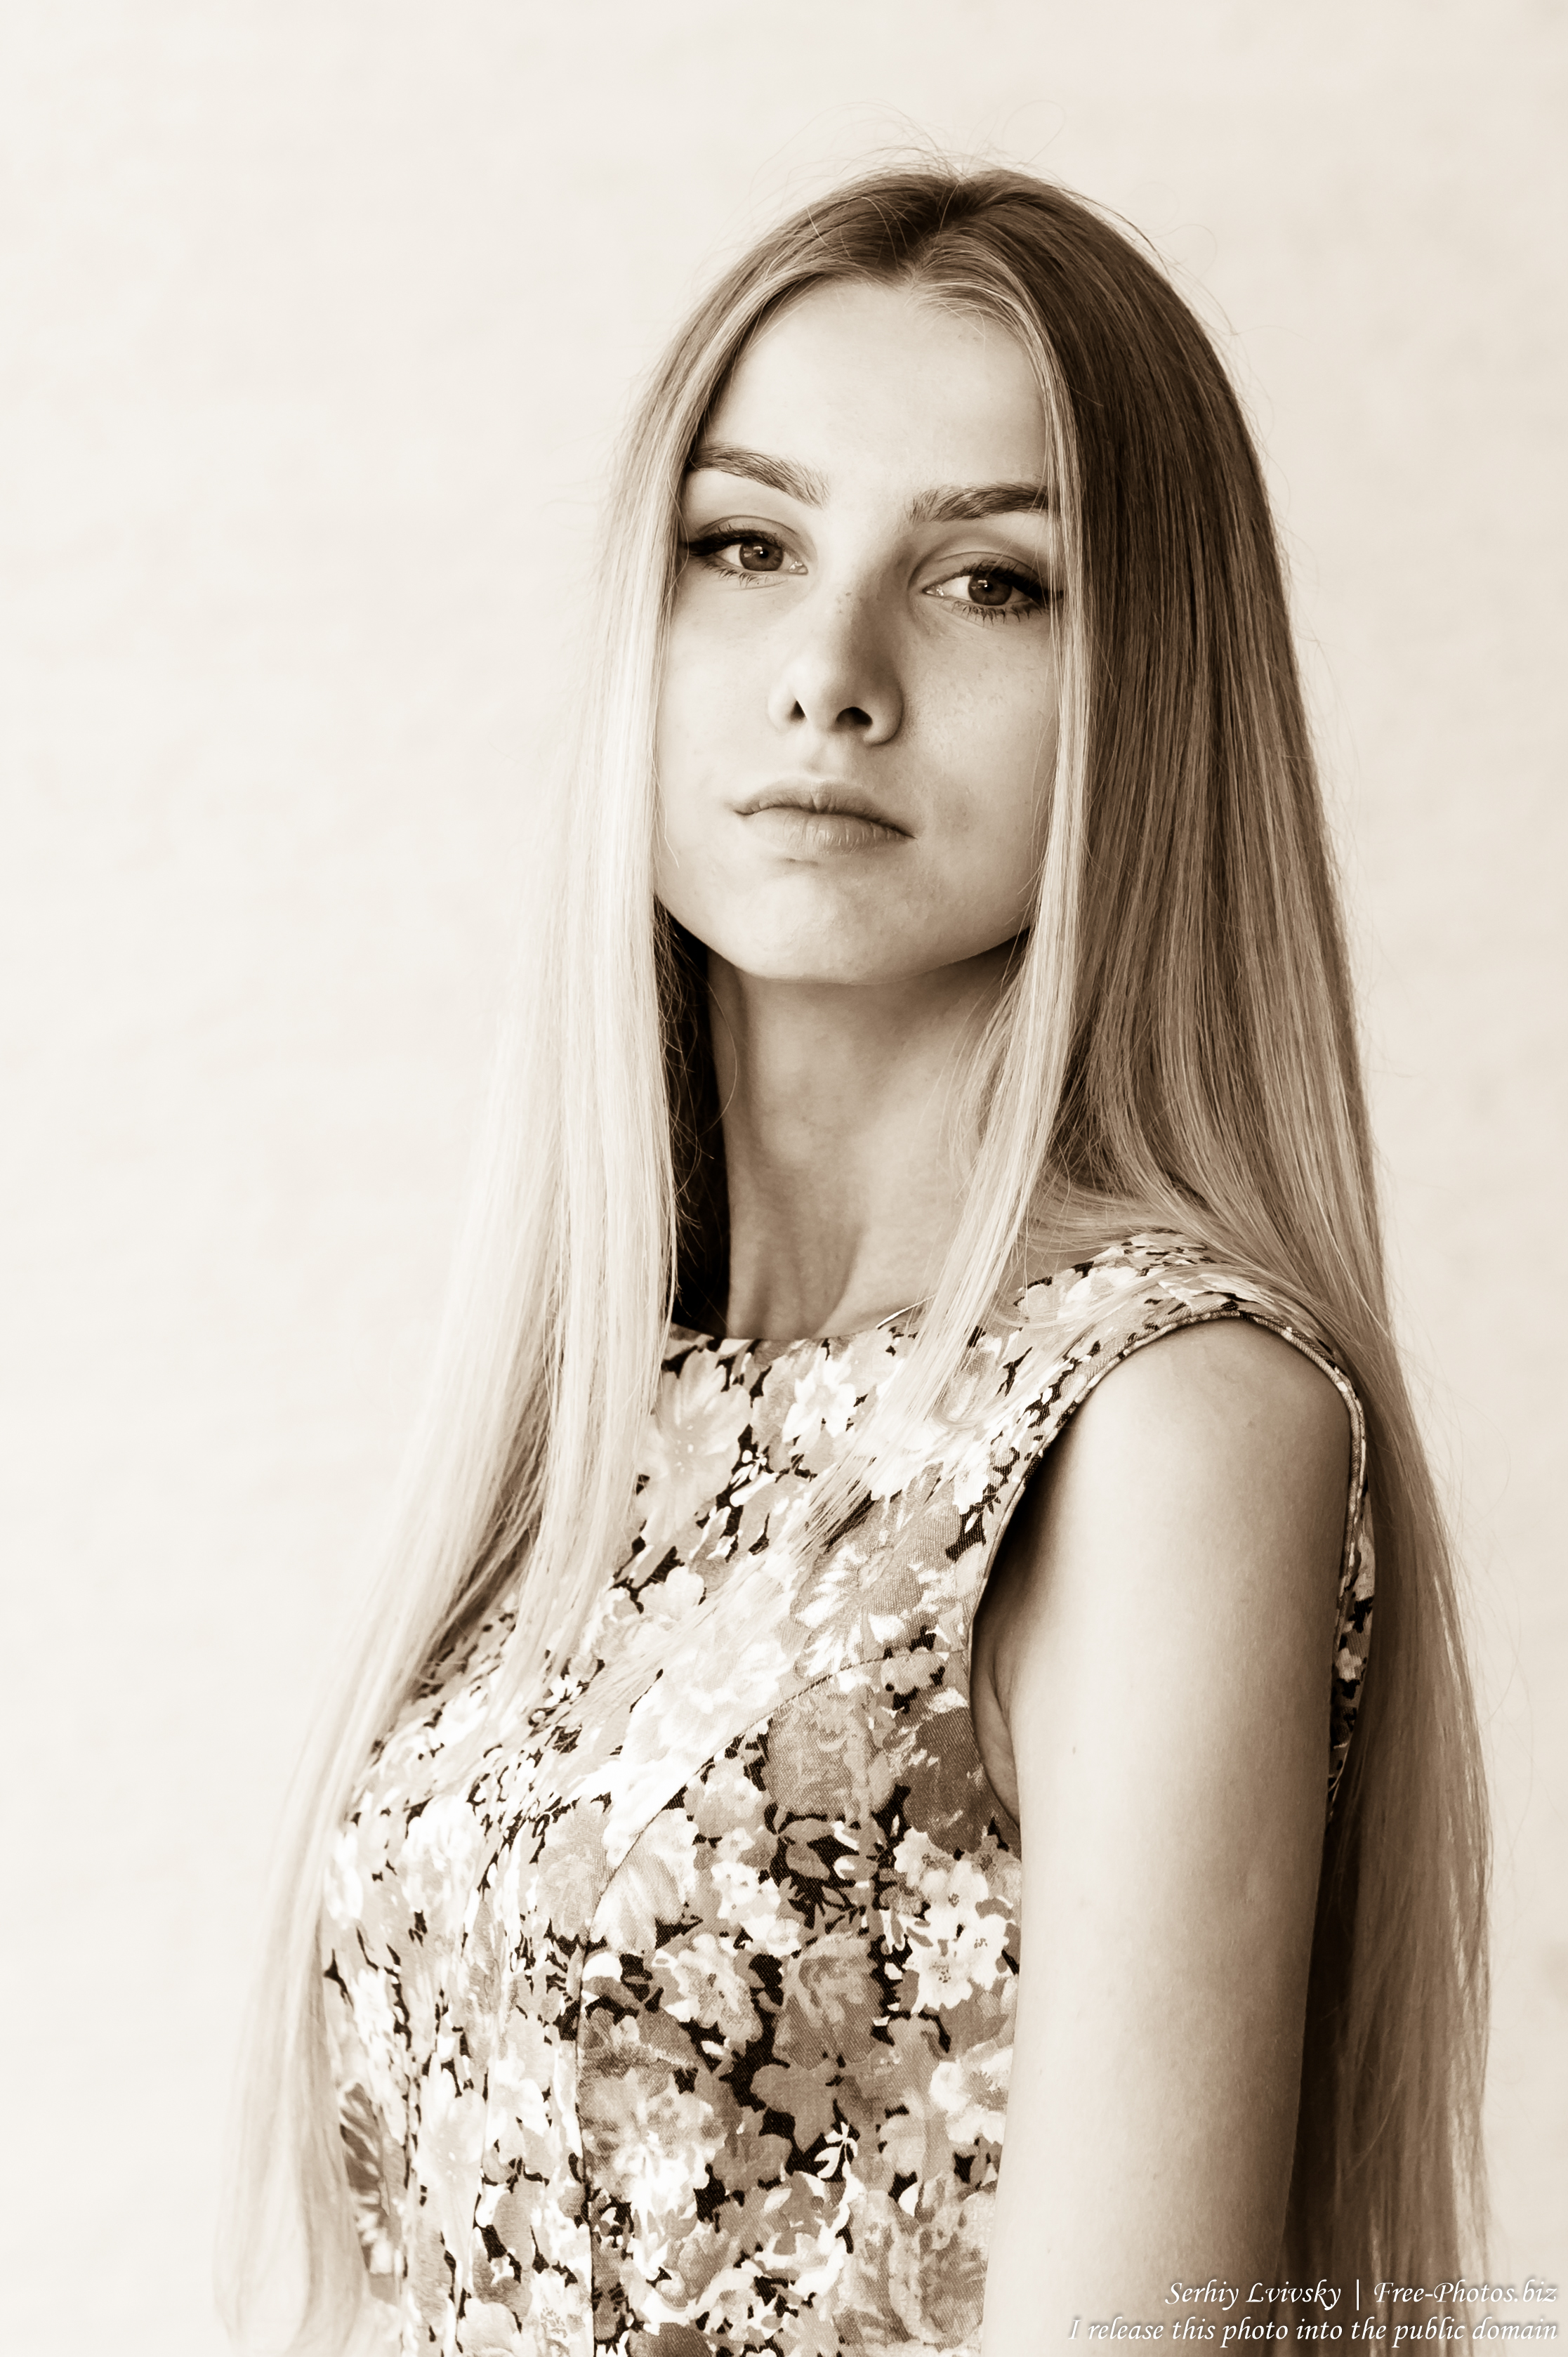 a 21-year-old natural blond girl photographed by Serhiy Lvivsky in july 2016, picture 5